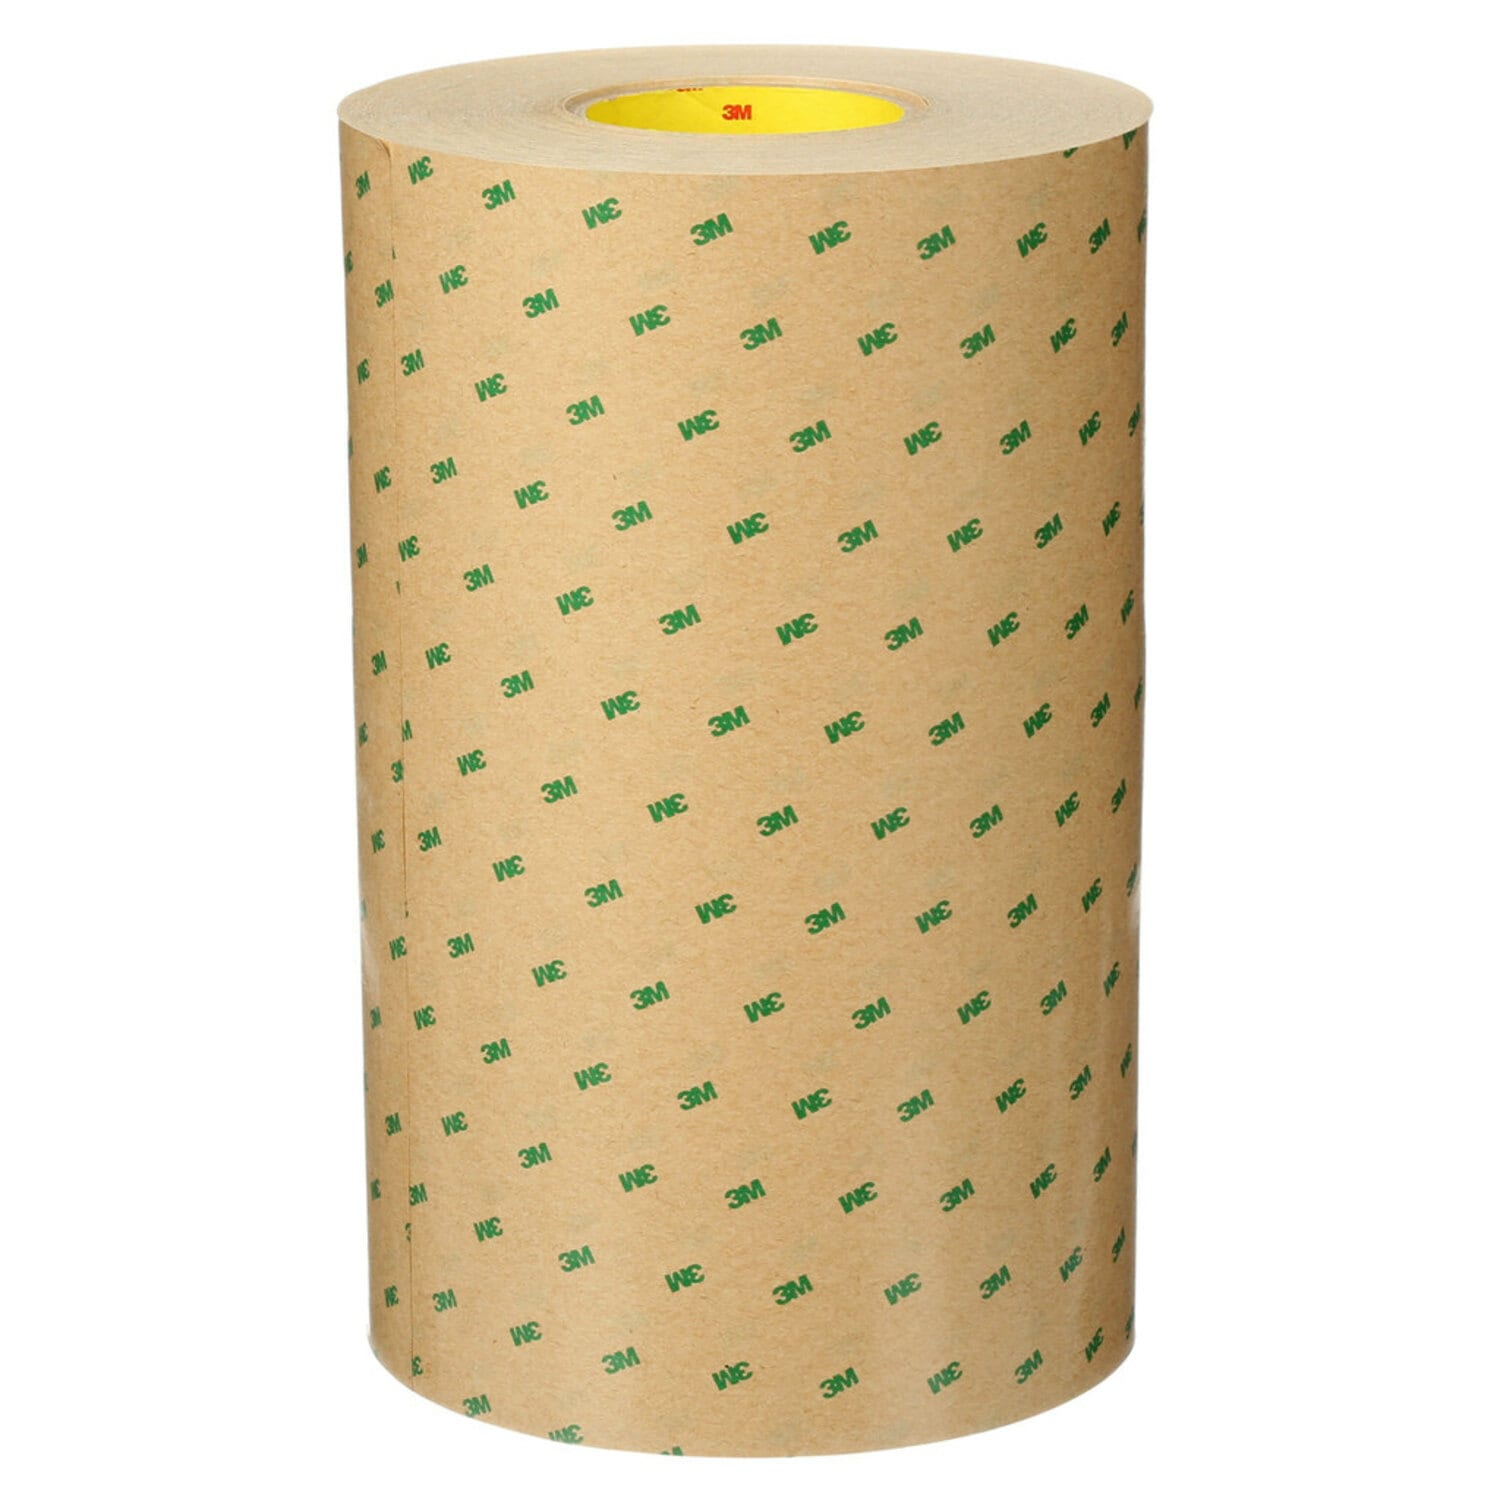 7000124308 - 3M Adhesive Transfer Tape 9471, Clear, 48 in x 60 yd, 2 mil, 1 roll per
case